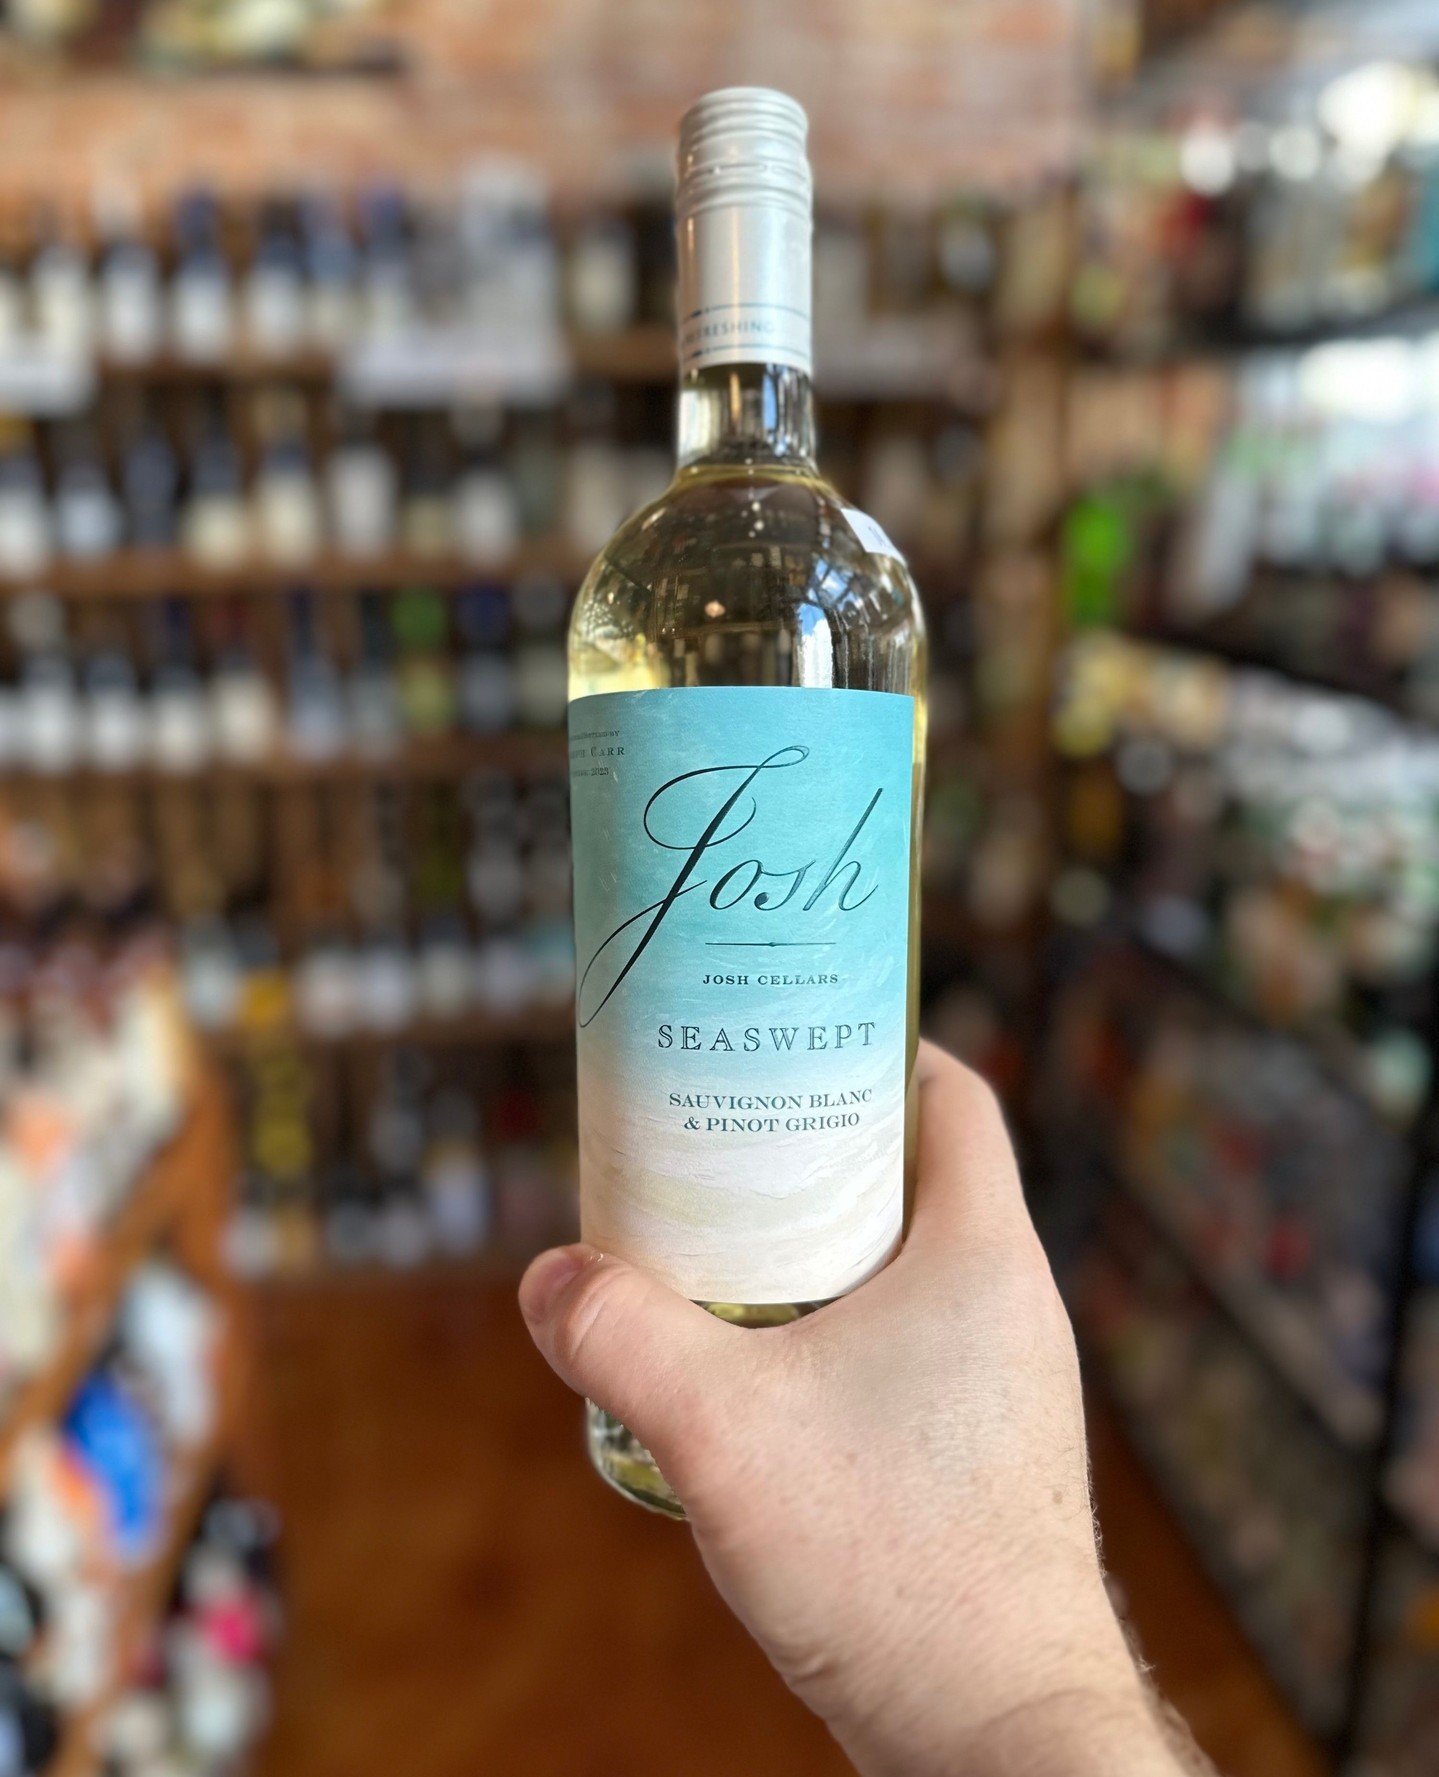 New Arrival: Josh Cellars Seaswept...a blend of Pinot Grigio and Sauvignon Blanc. Now available!